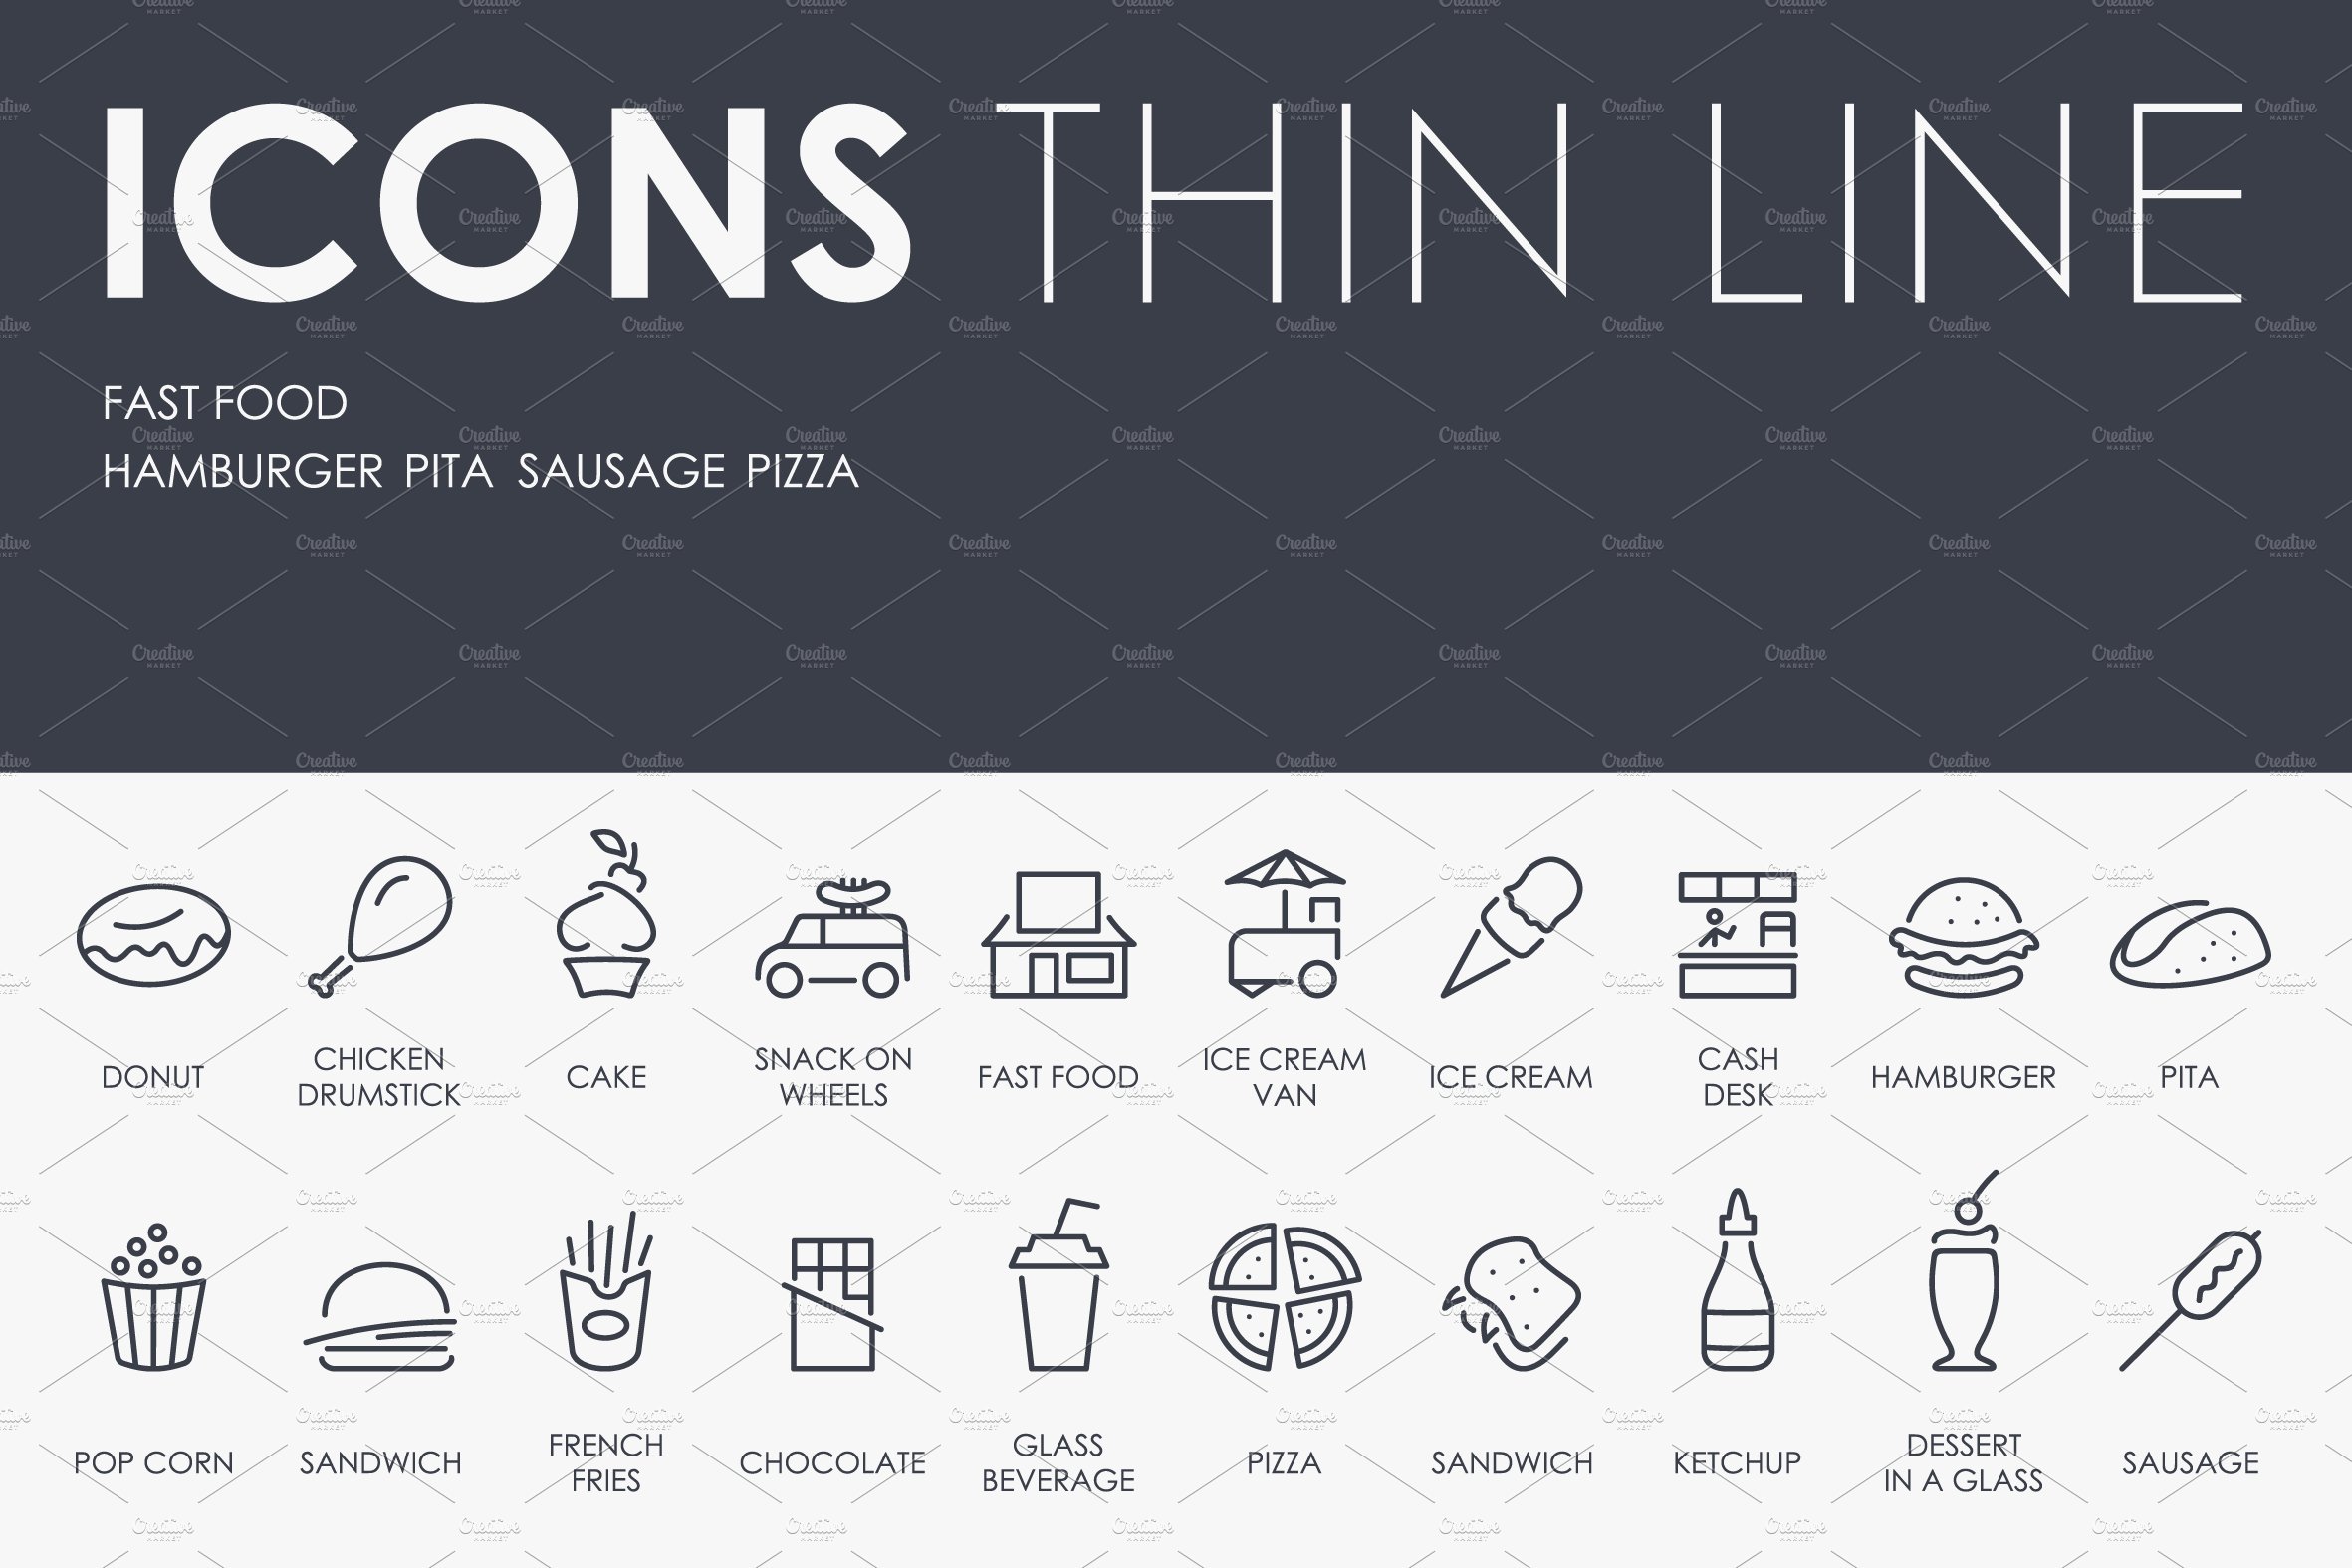 Fast food thinline icons cover image.